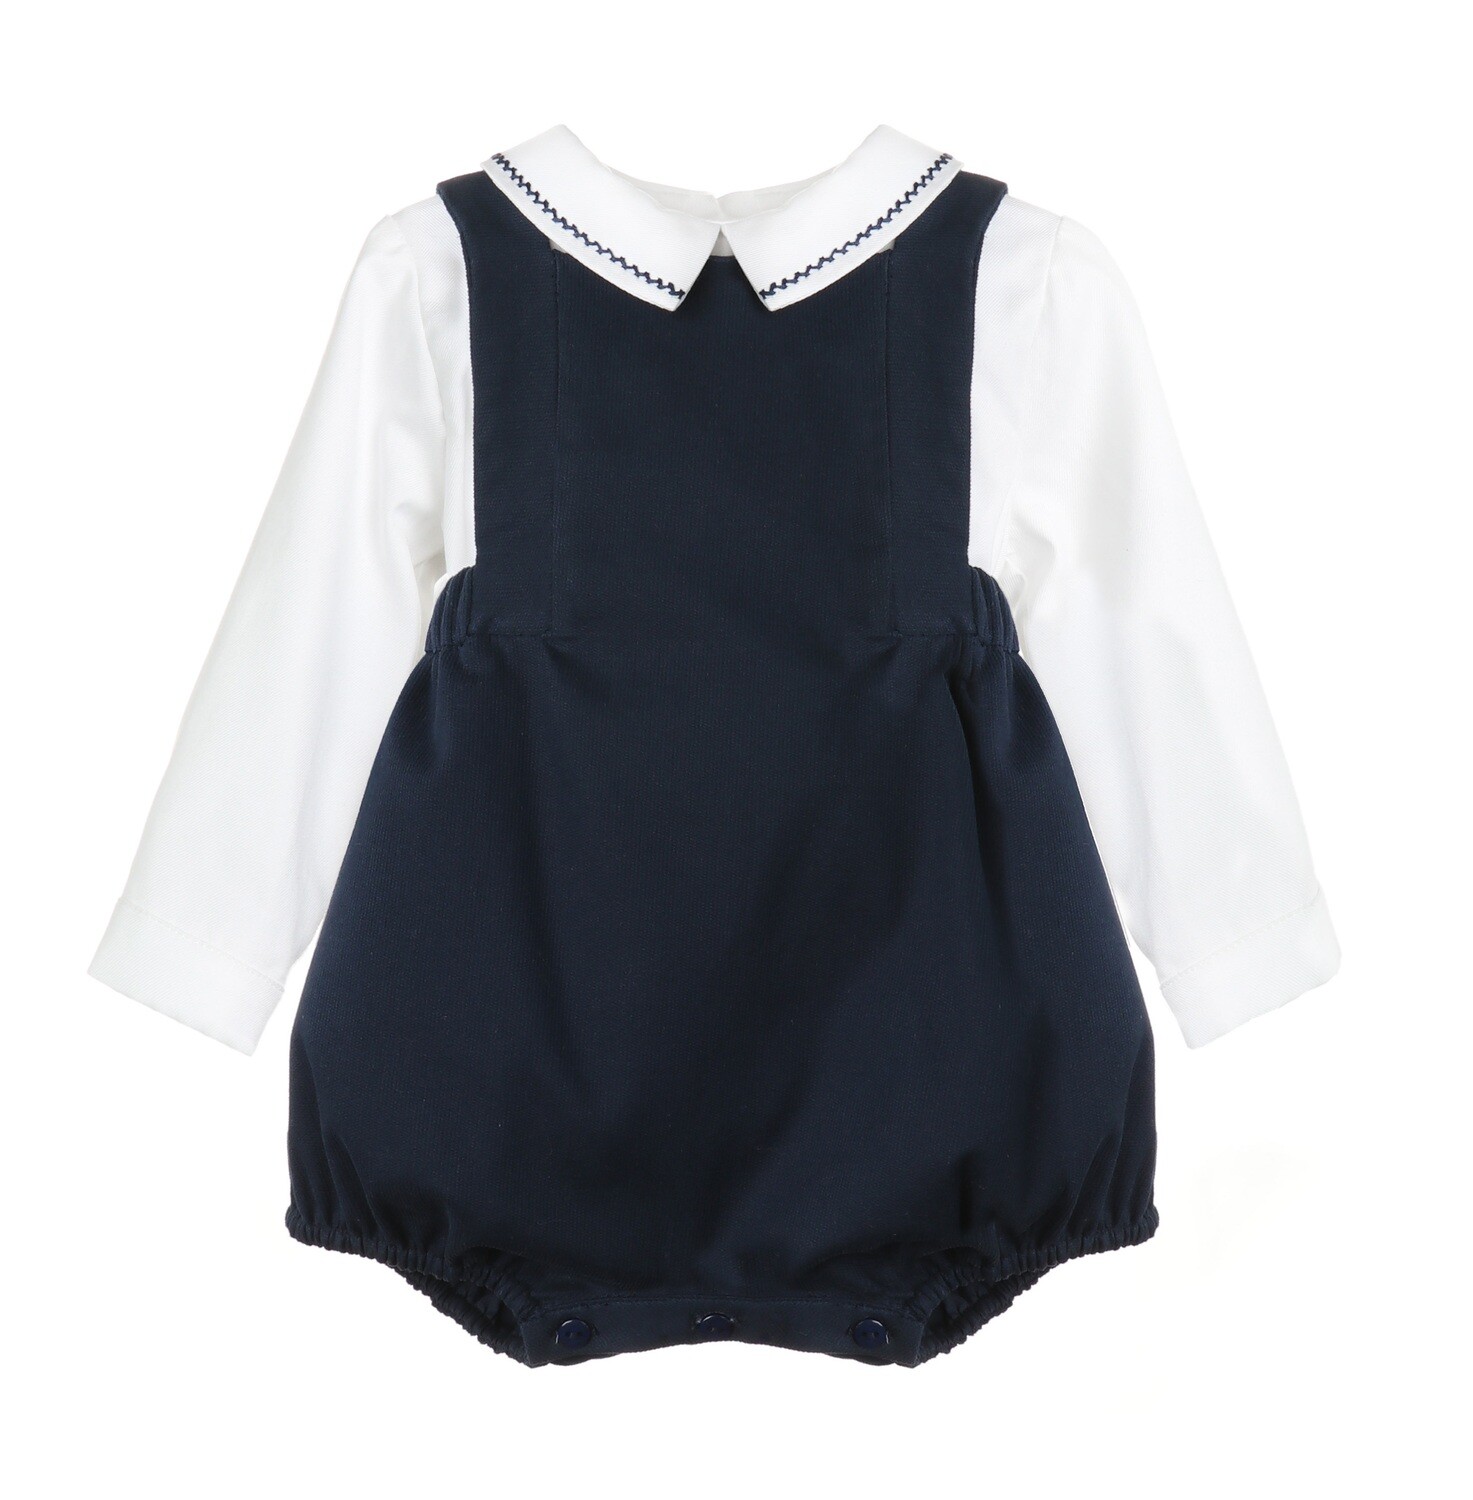 Sophie & Lucas Chinoise Boy Overall